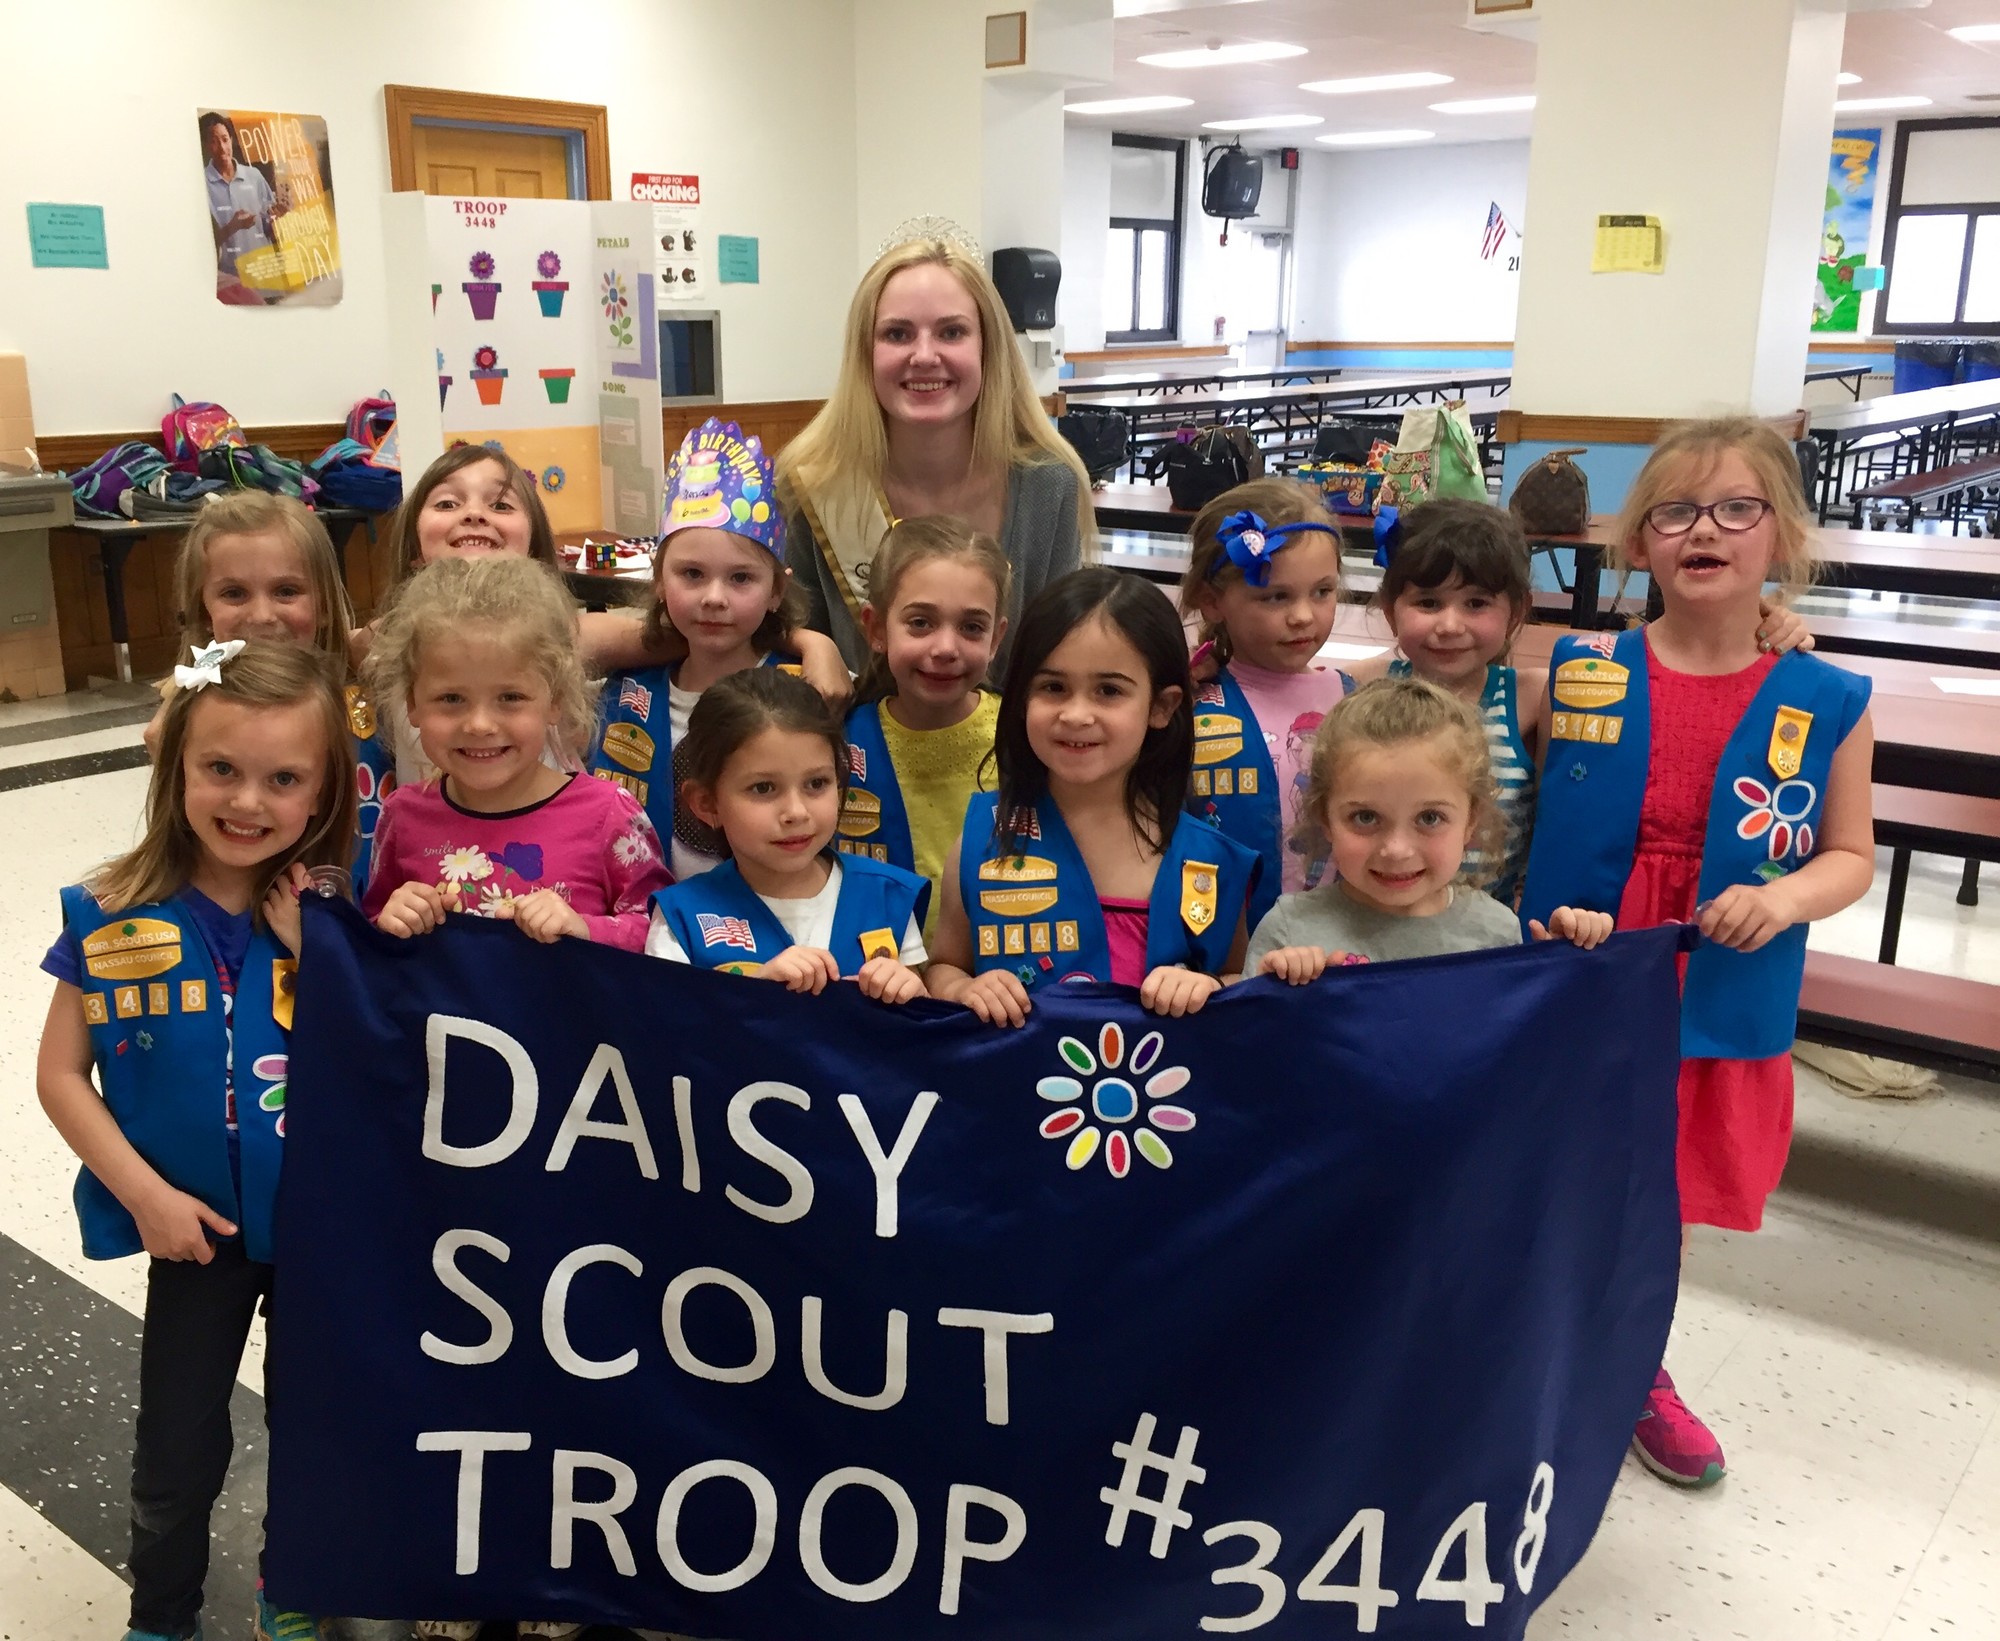 Daisy Scouts are excited to show off their banner in the Wantagh Memorial Day parade on Monday, made with the help of Miss Wantagh, Keri Balnis.